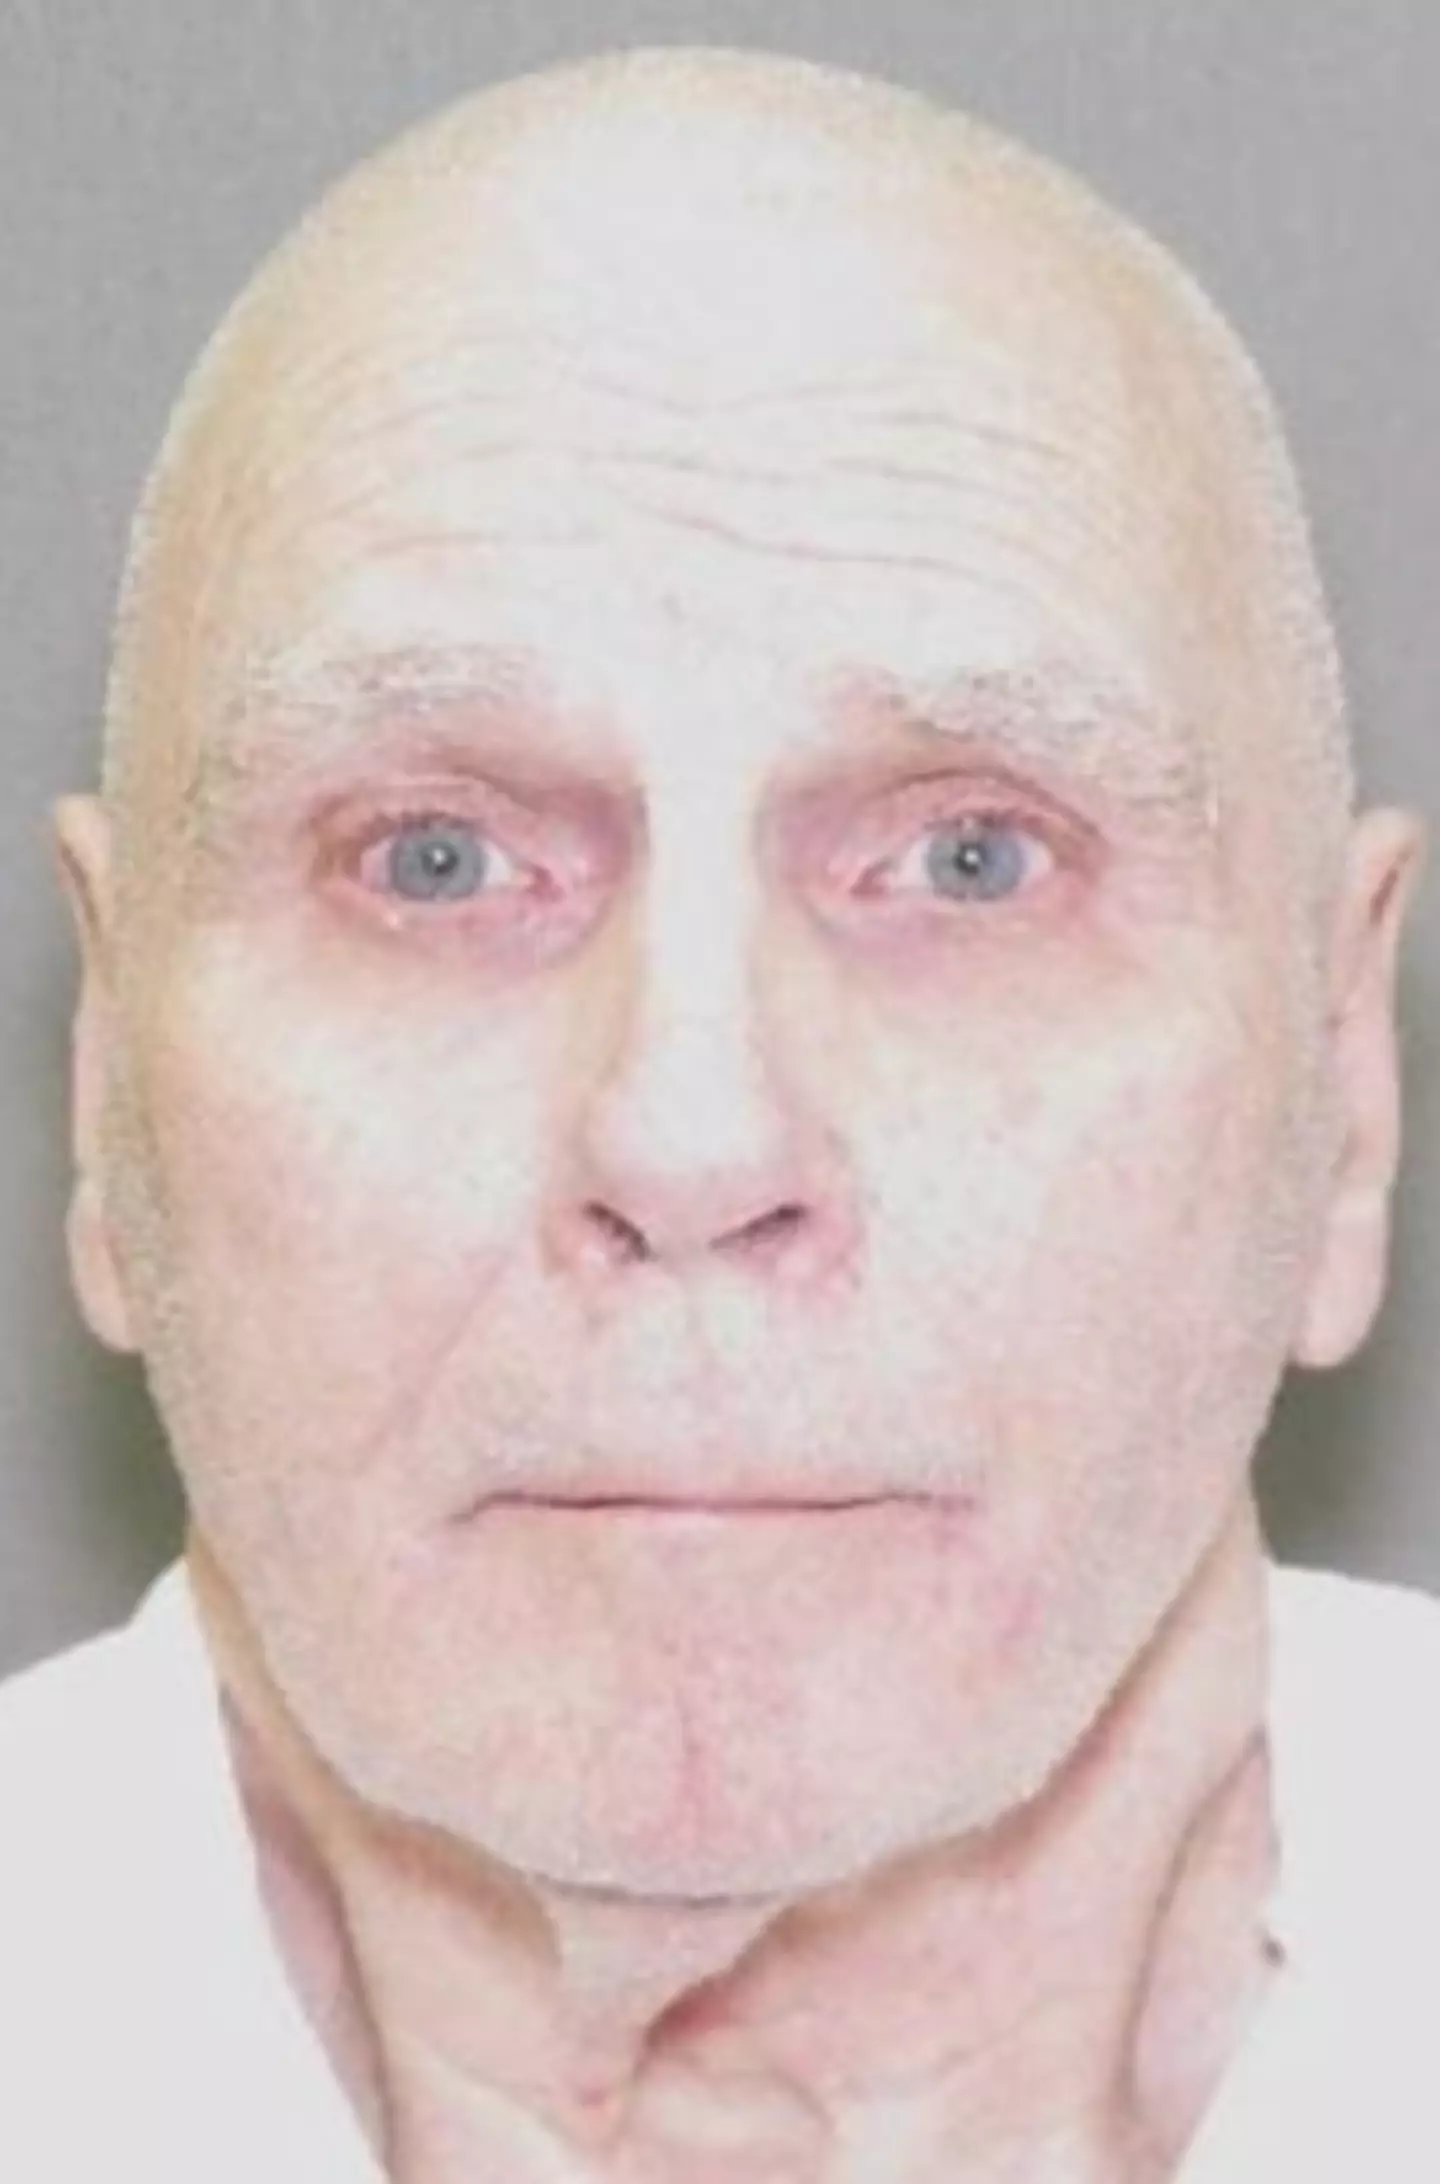 Carl Wayne Buntion will also be executed today by lethal injection.